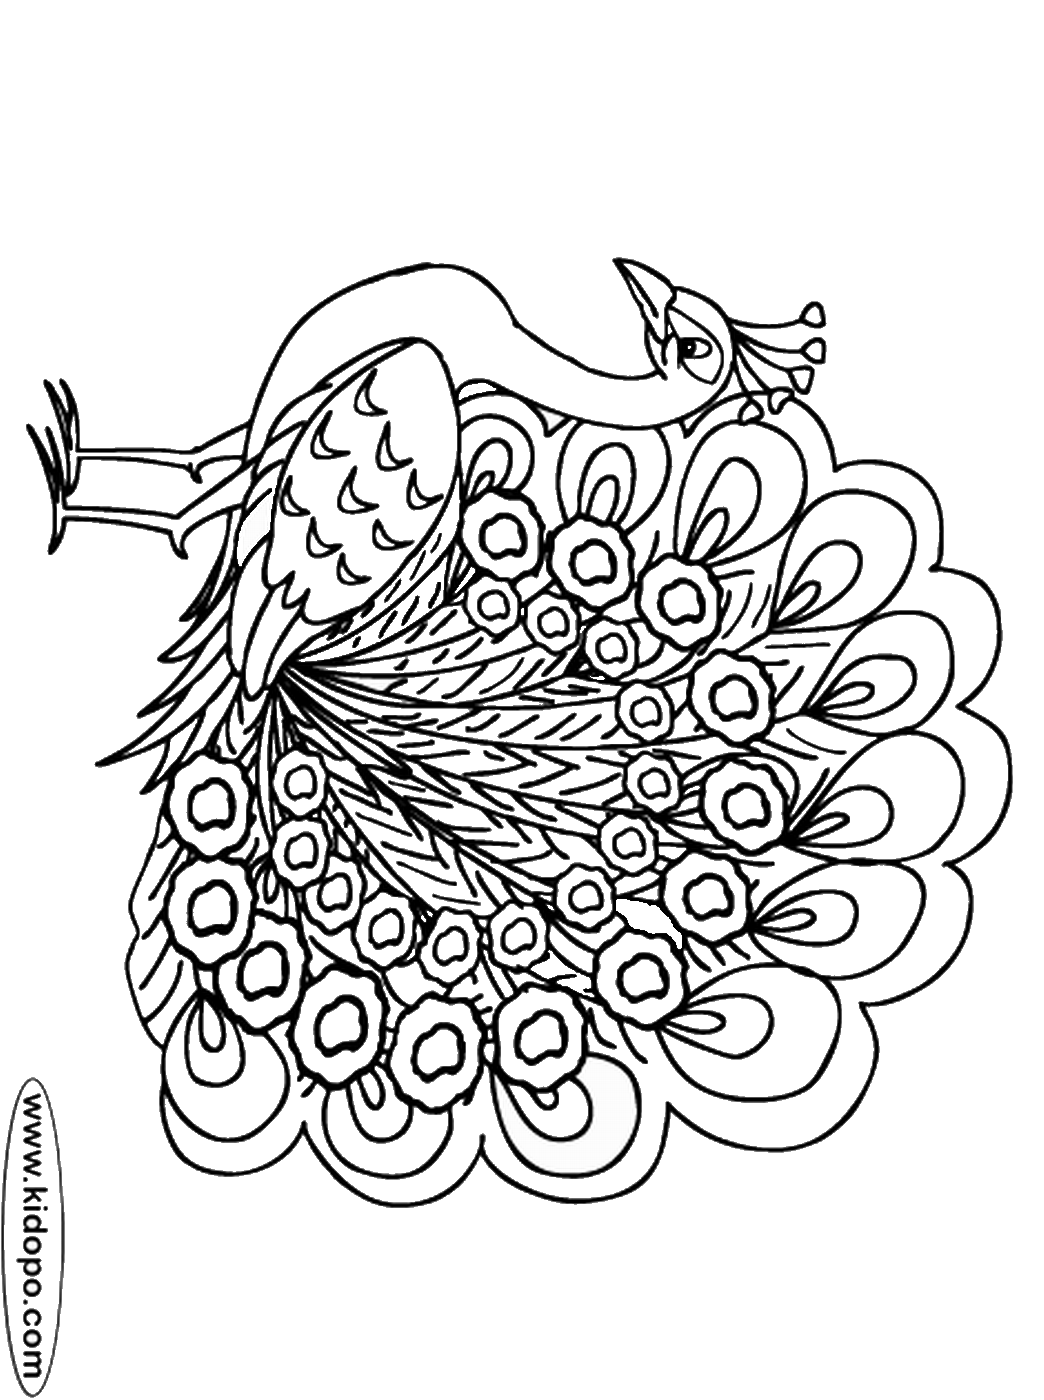 Peacock Coloring Pages Coloring Rocks